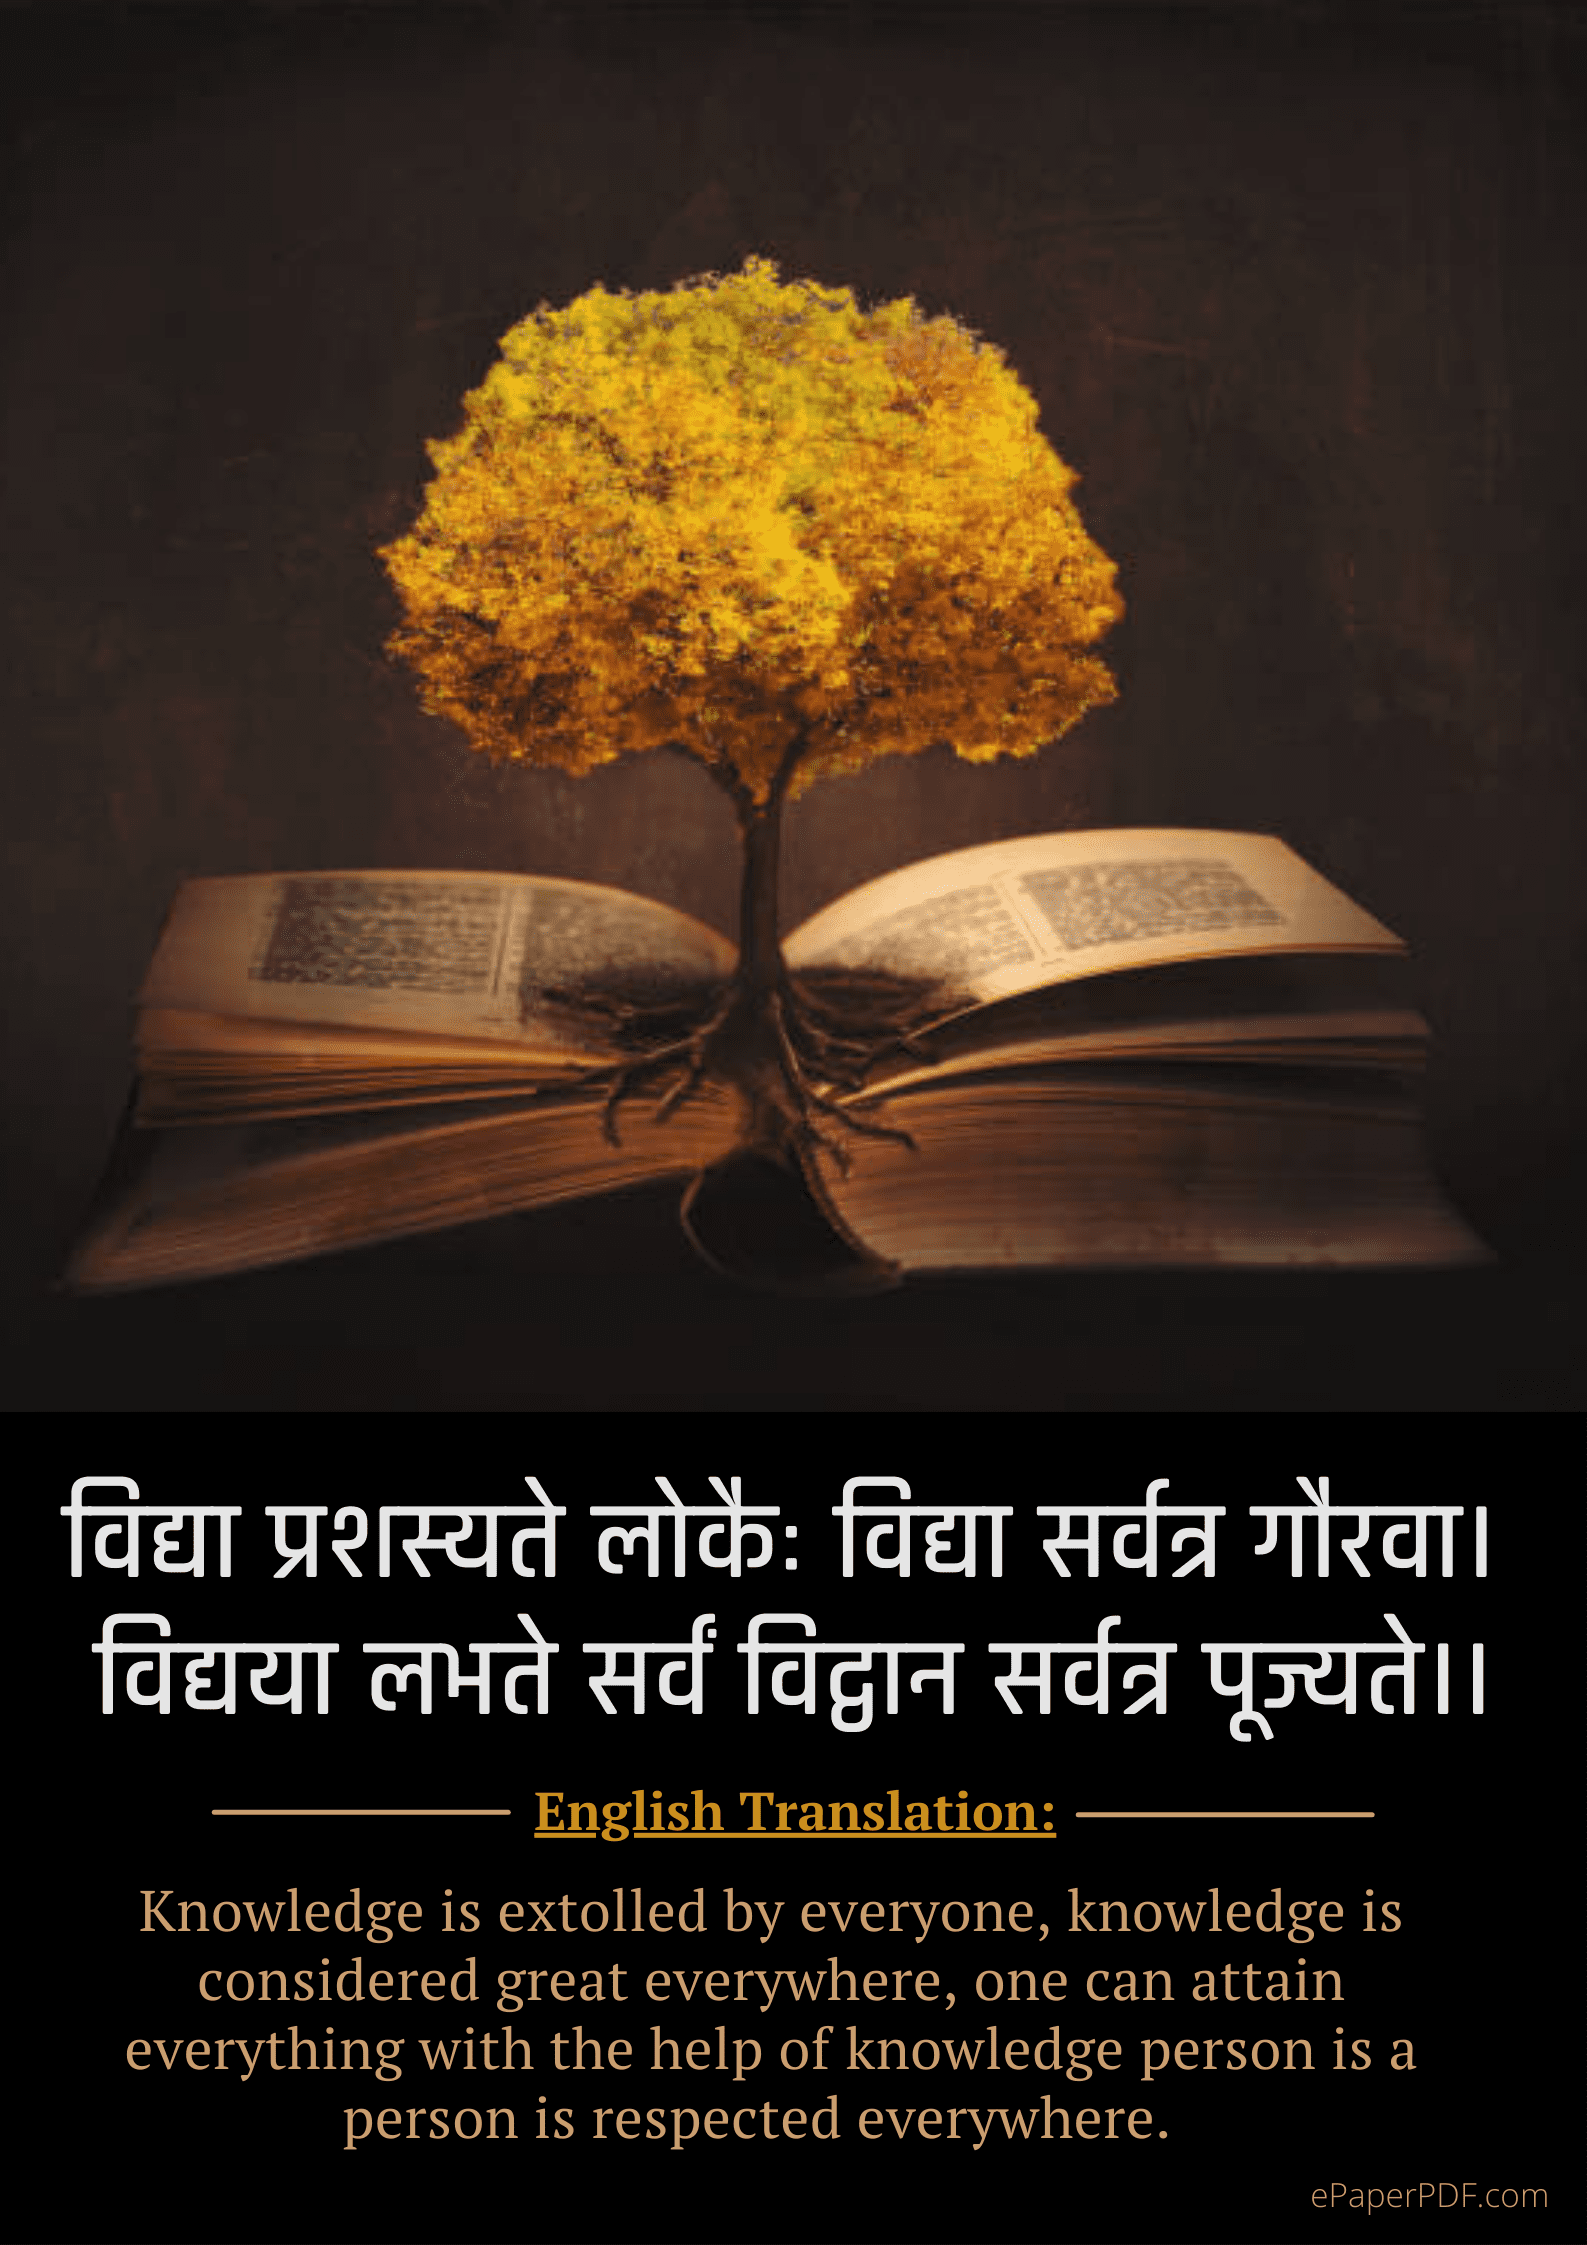 Sanskrit Quotes On Study with Meaning: Download HD Wallpapers